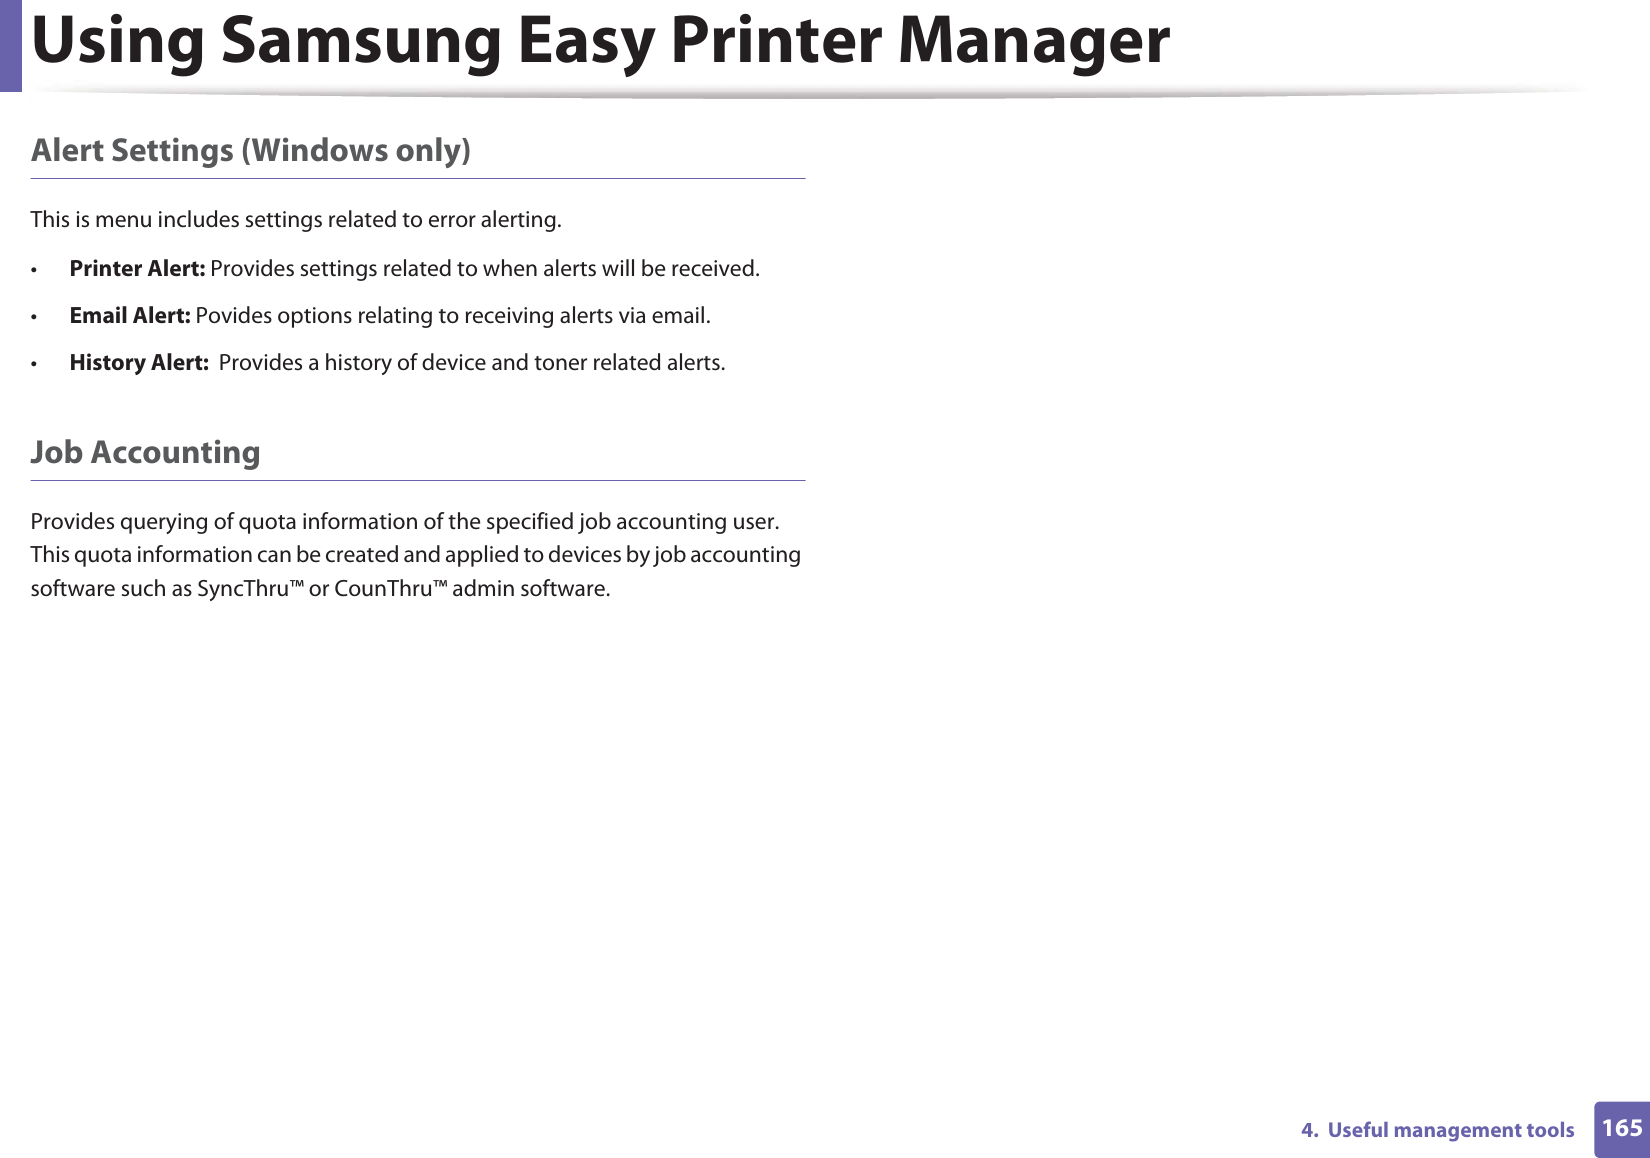 Using Samsung Easy Printer Manager1654.  Useful management toolsAlert Settings (Windows only)This is menu includes settings related to error alerting. •Printer Alert: Provides settings related to when alerts will be received.•Email Alert: Povides options relating to receiving alerts via email.•History Alert:  Provides a history of device and toner related alerts.Job AccountingProvides querying of quota information of the specified job accounting user. This quota information can be created and applied to devices by job accounting software such as SyncThru™ or CounThru™ admin software.